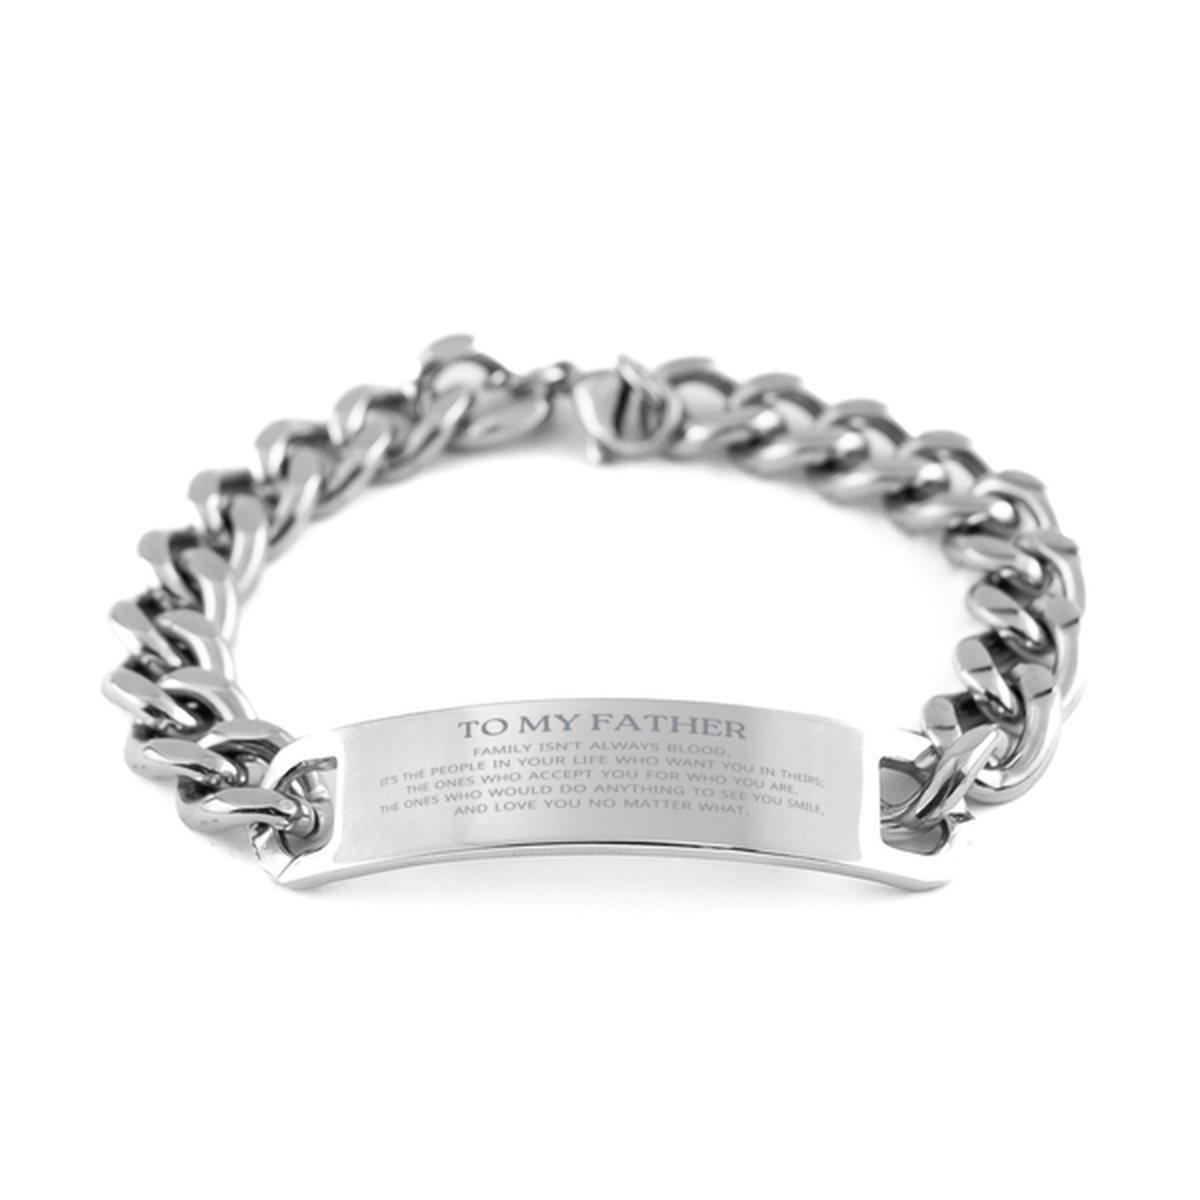 To My Father Gifts, Family isn't always blood, Father Cuban Chain Stainless Steel Bracelet, Birthday Christmas Unique Present For Father